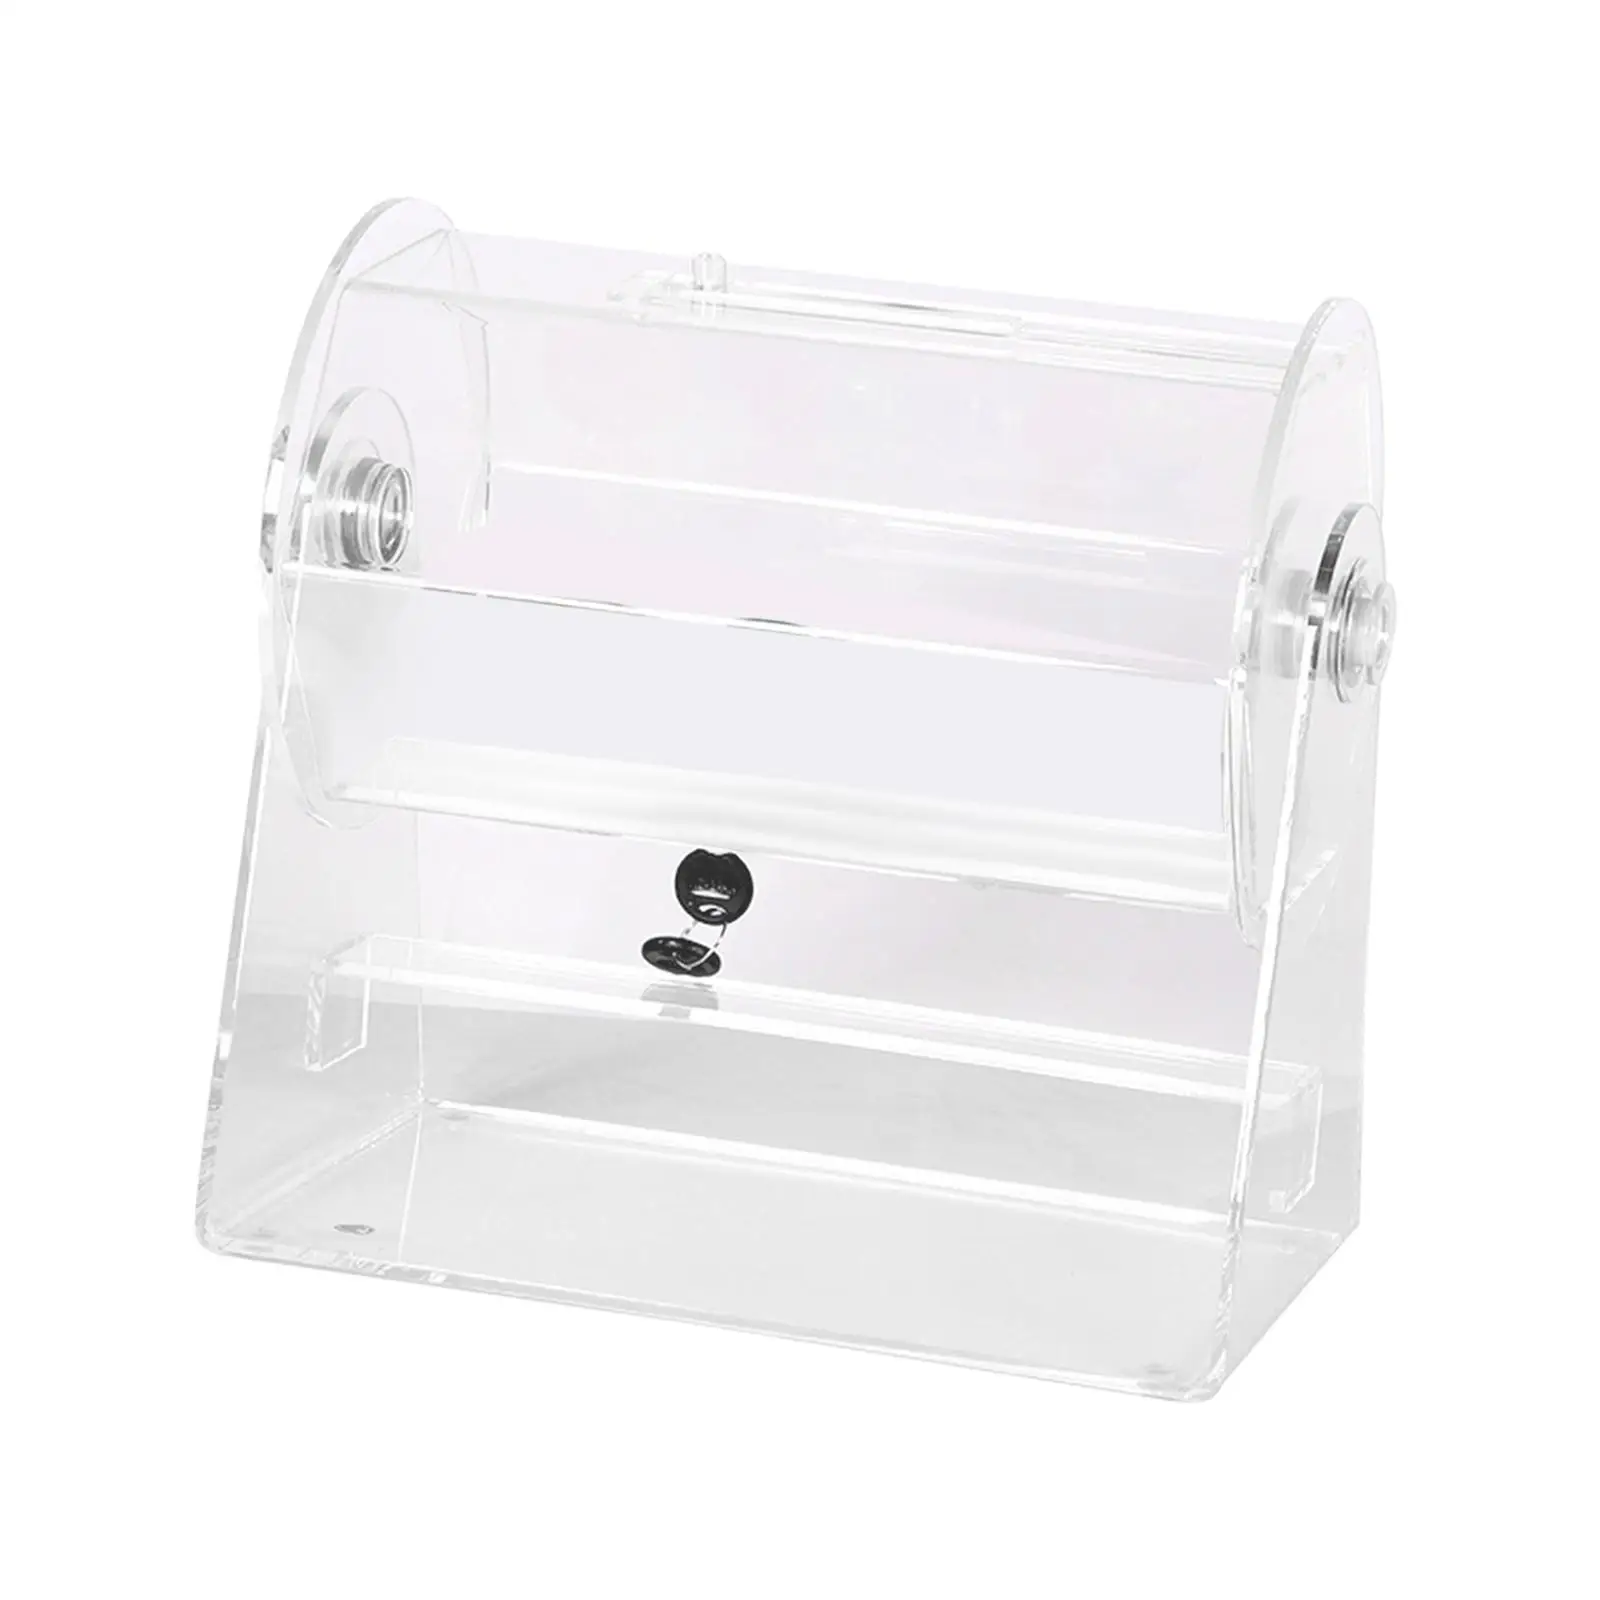 Automatic Lottery Cage Lottery Parent Child Games Raffle Case Acrylic Raffle Drum for Holiday Birthday Party Activity Travel